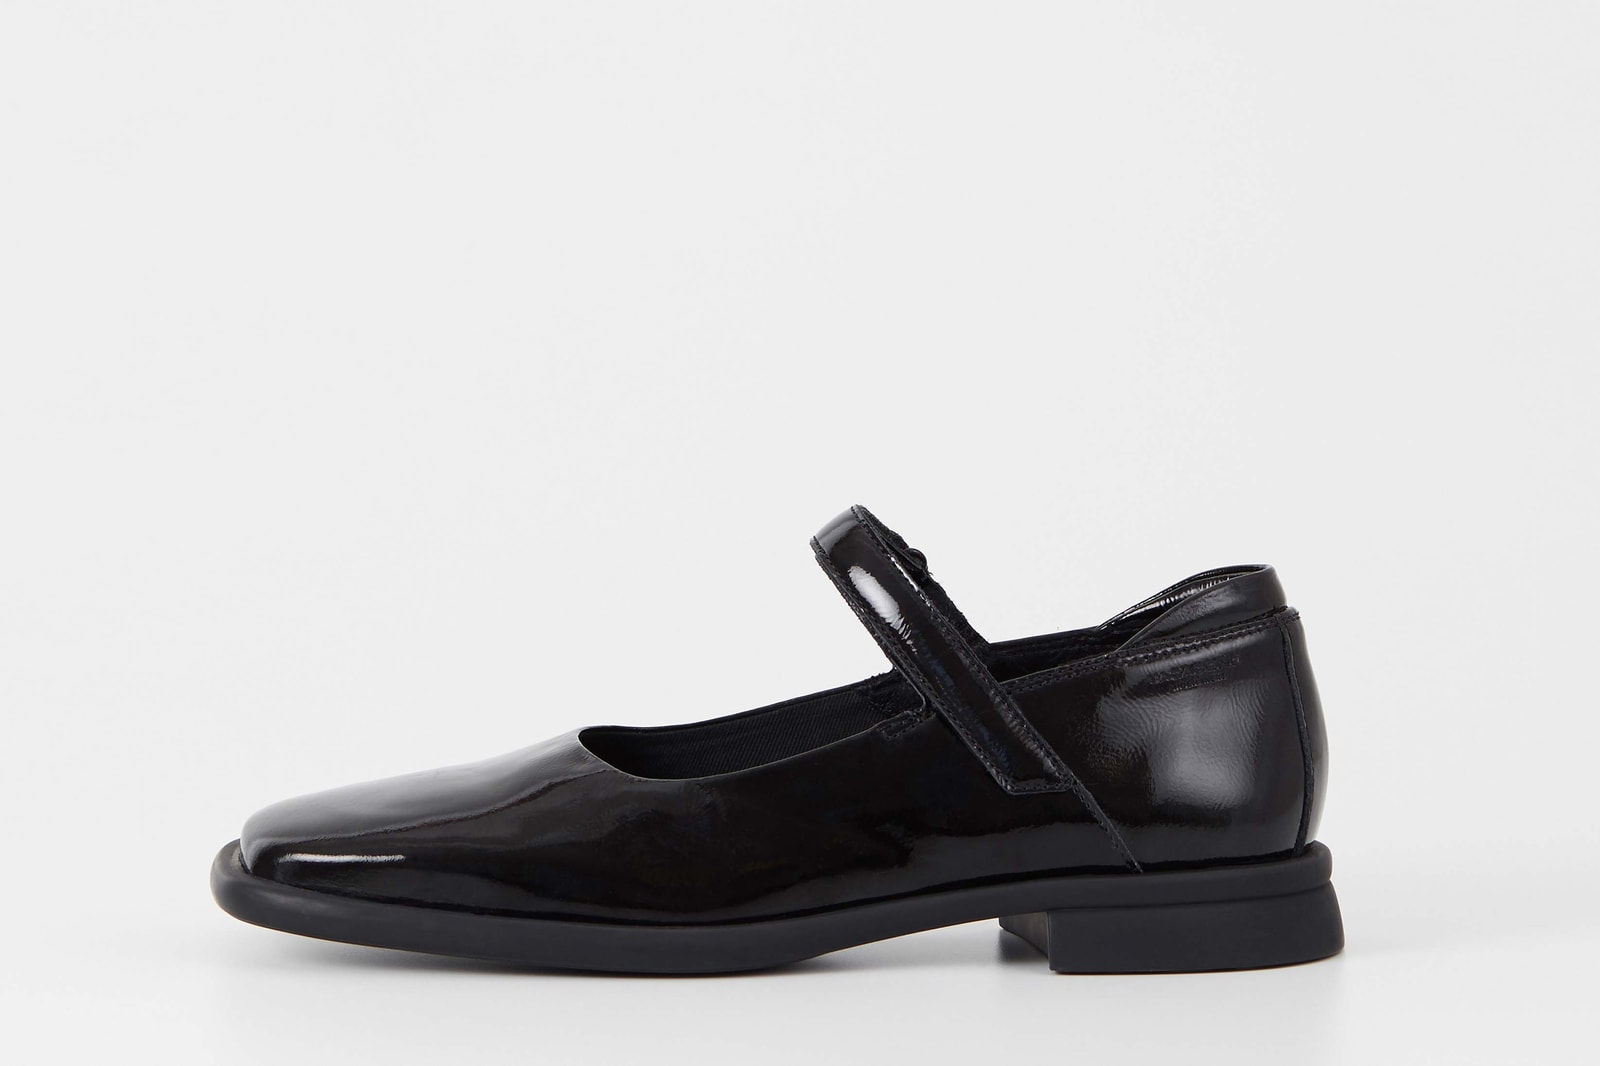 Vagabond Shoemakers’ AW22 Collection Highlights The 